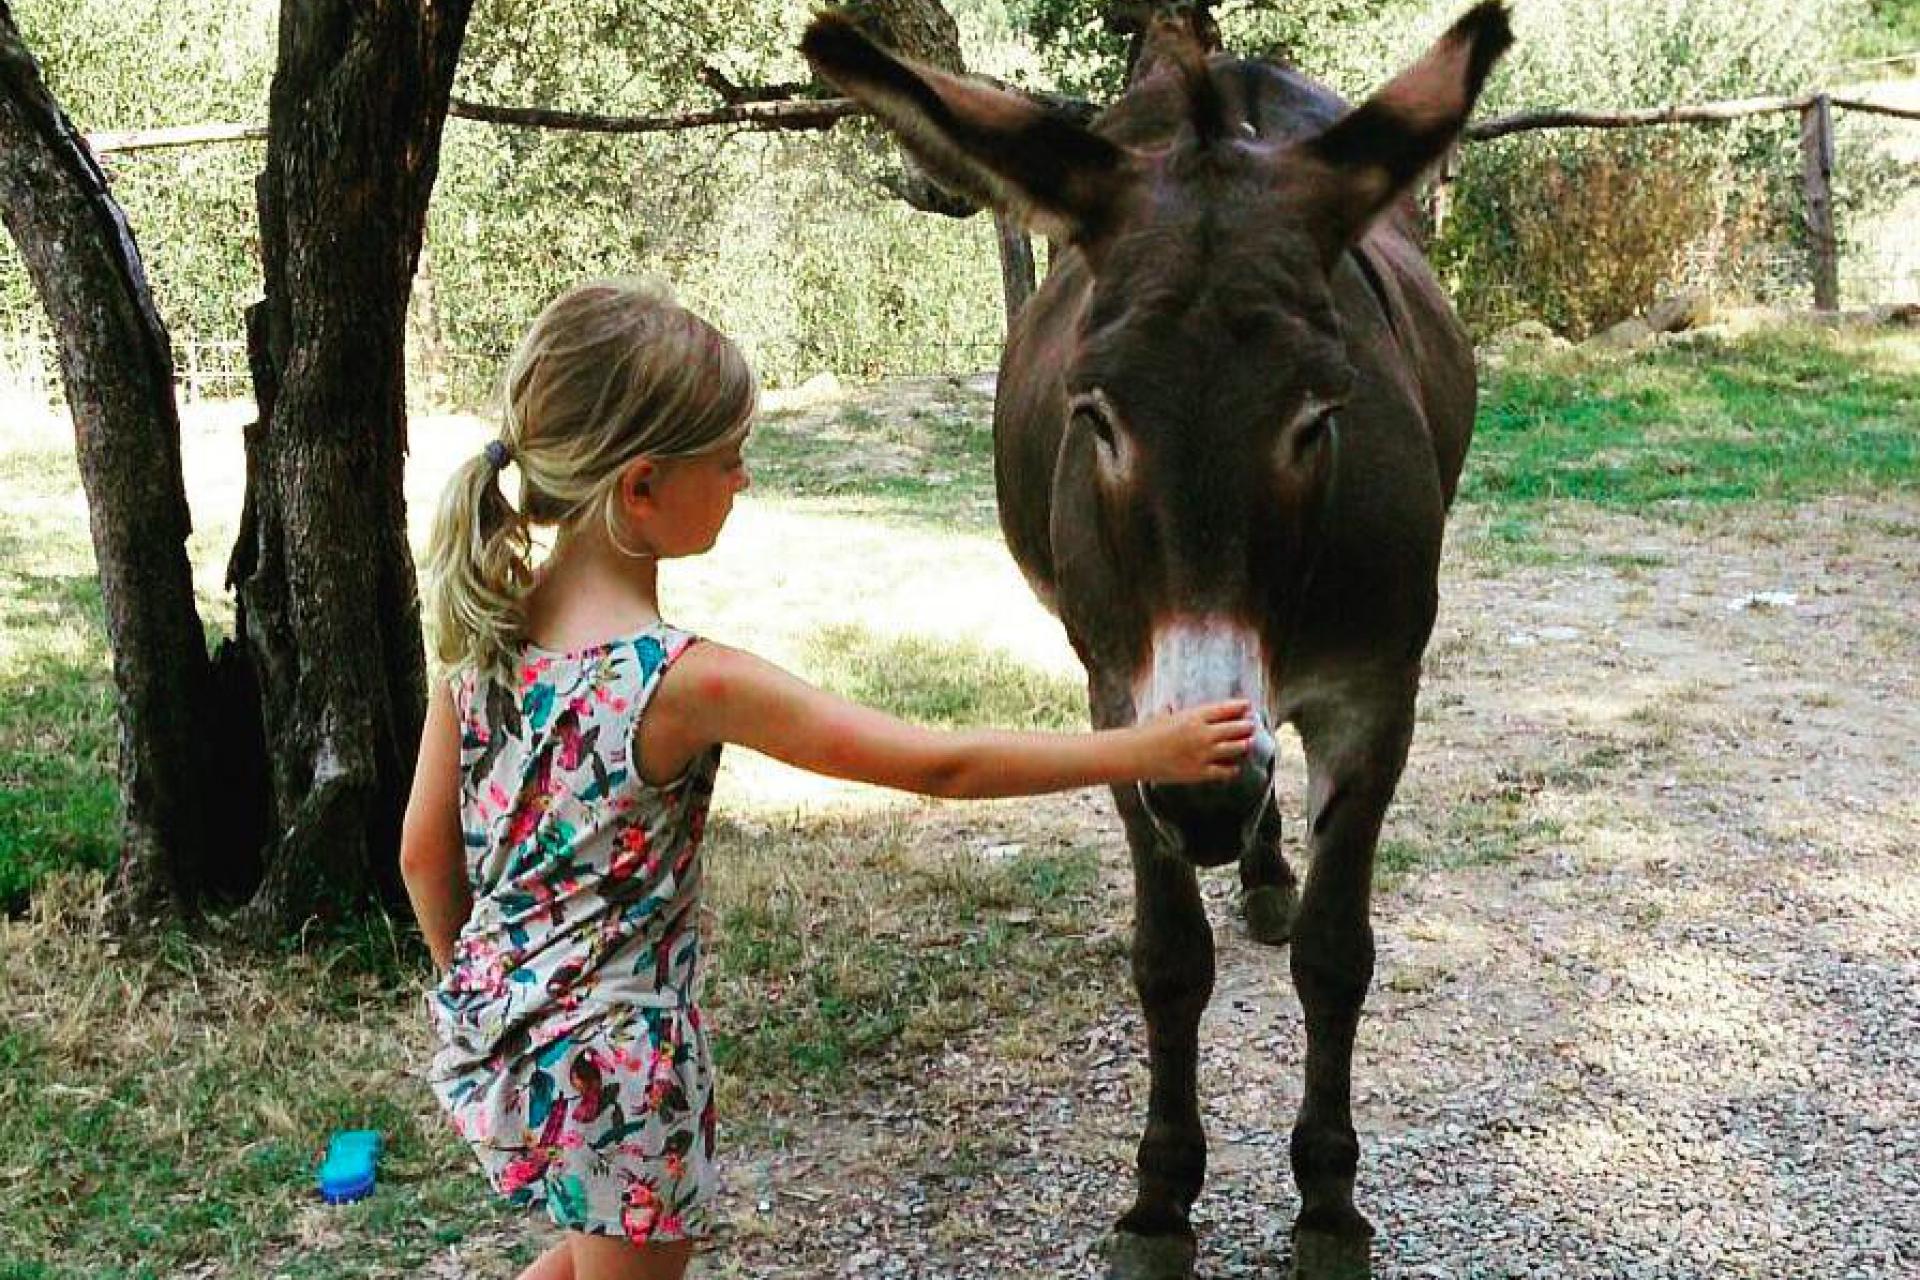 Child-friendly agriturismo with farm animals